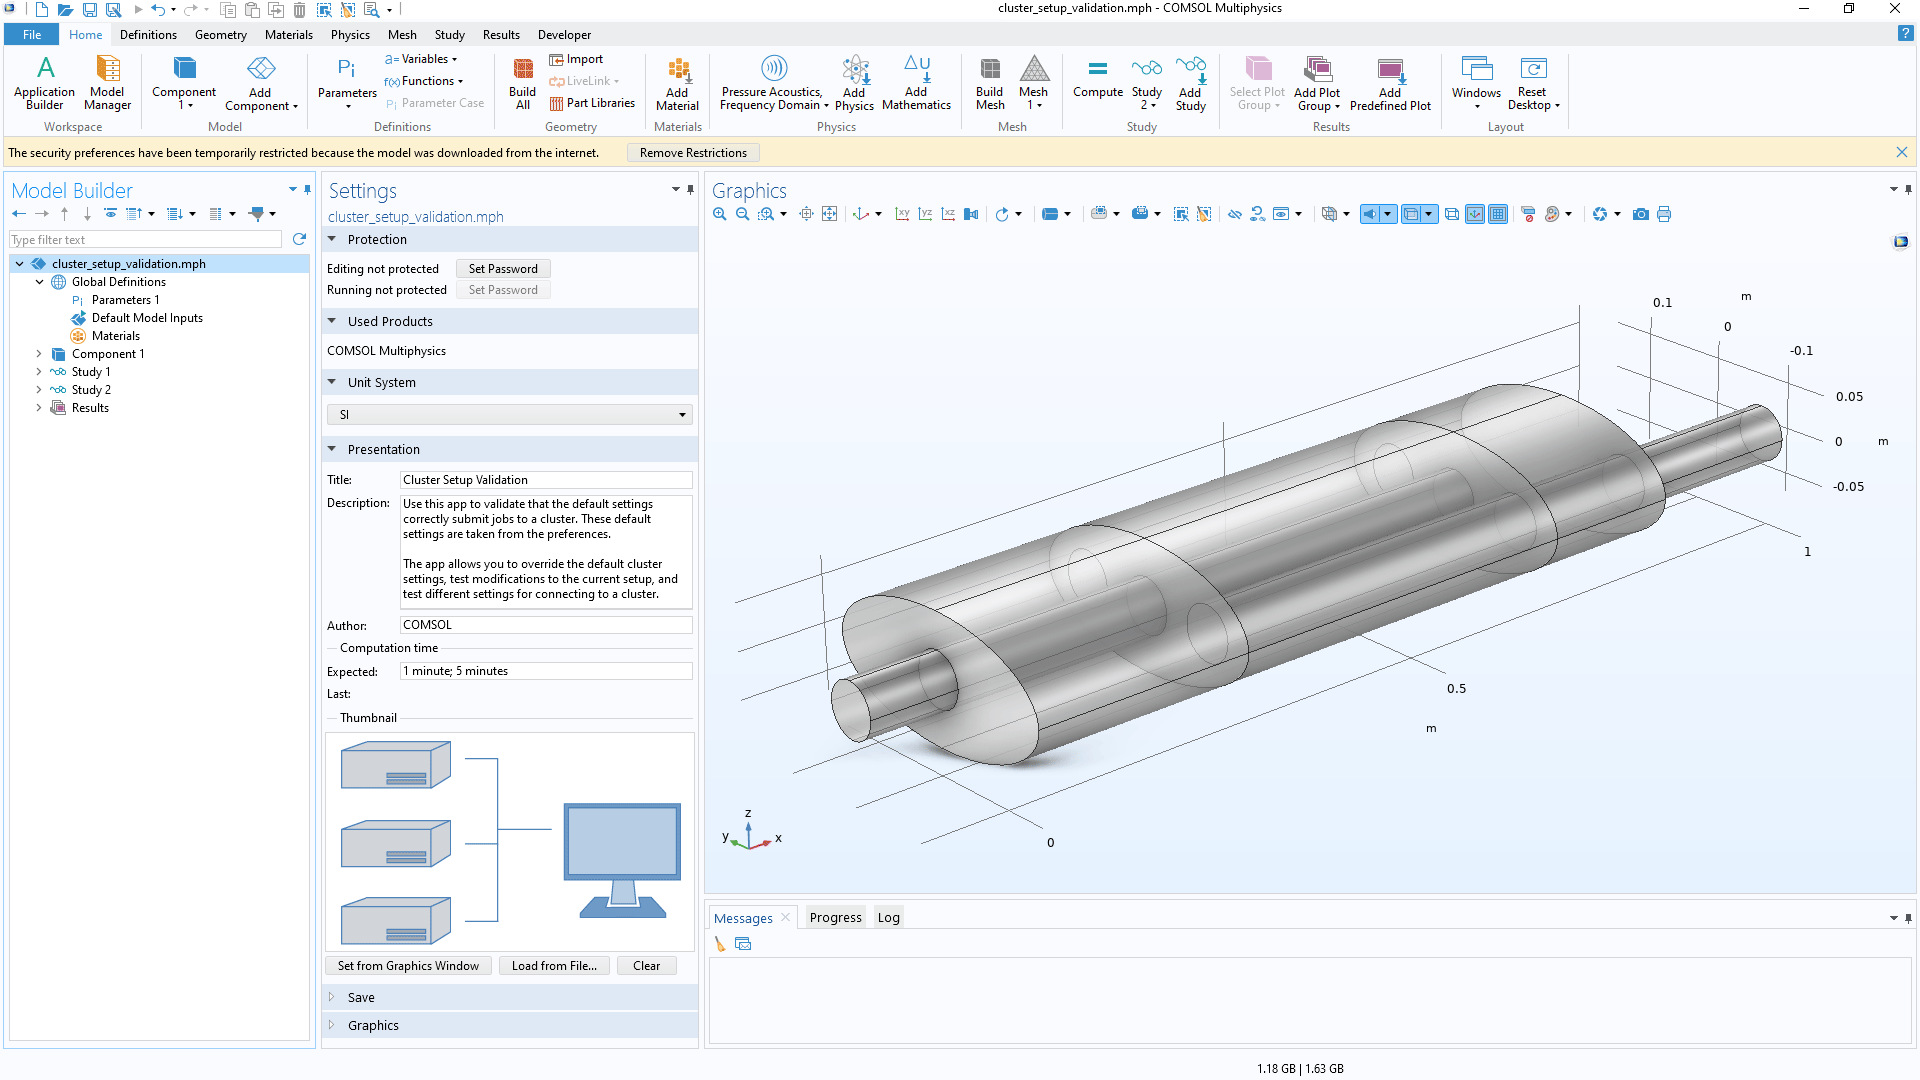 The COMSOL Multiphysics UI with a yellow restriction warning banner underneath the Model Builder ribbon and a button to remove the restrictions.